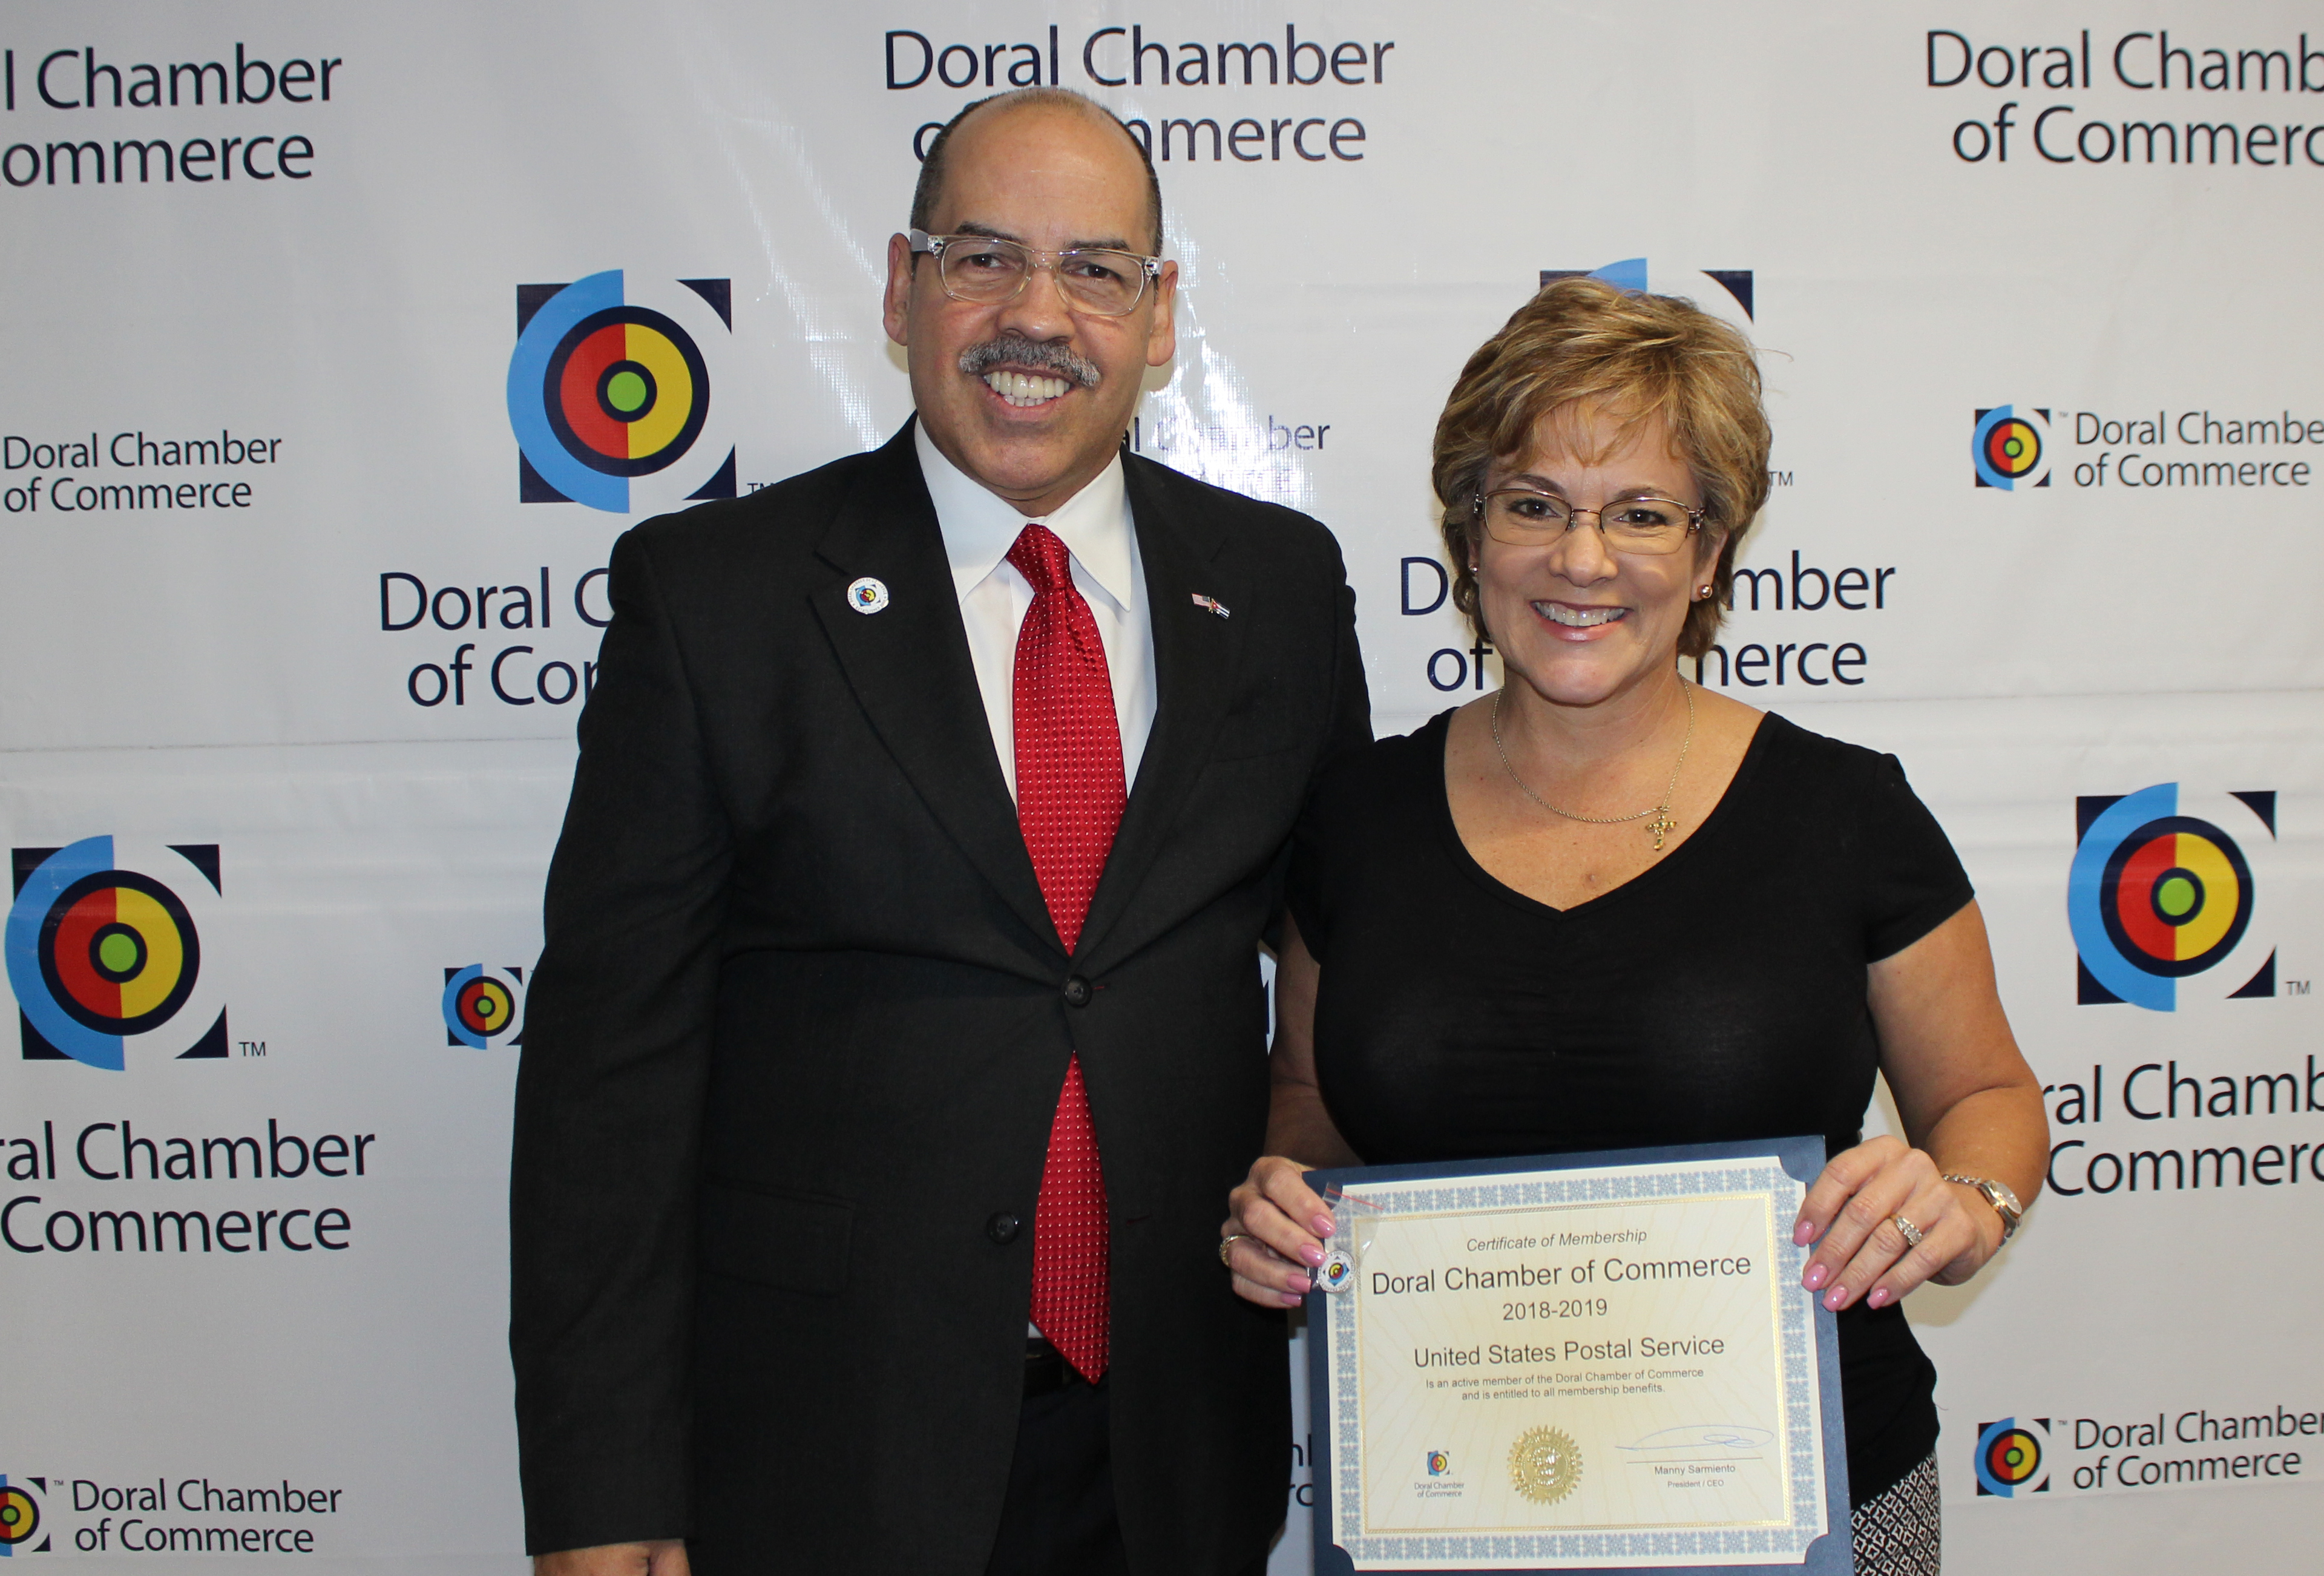 Doral Chamber of Commerce introduces Circle of Success event, photo with Manny Sarmiento, member being given an award.